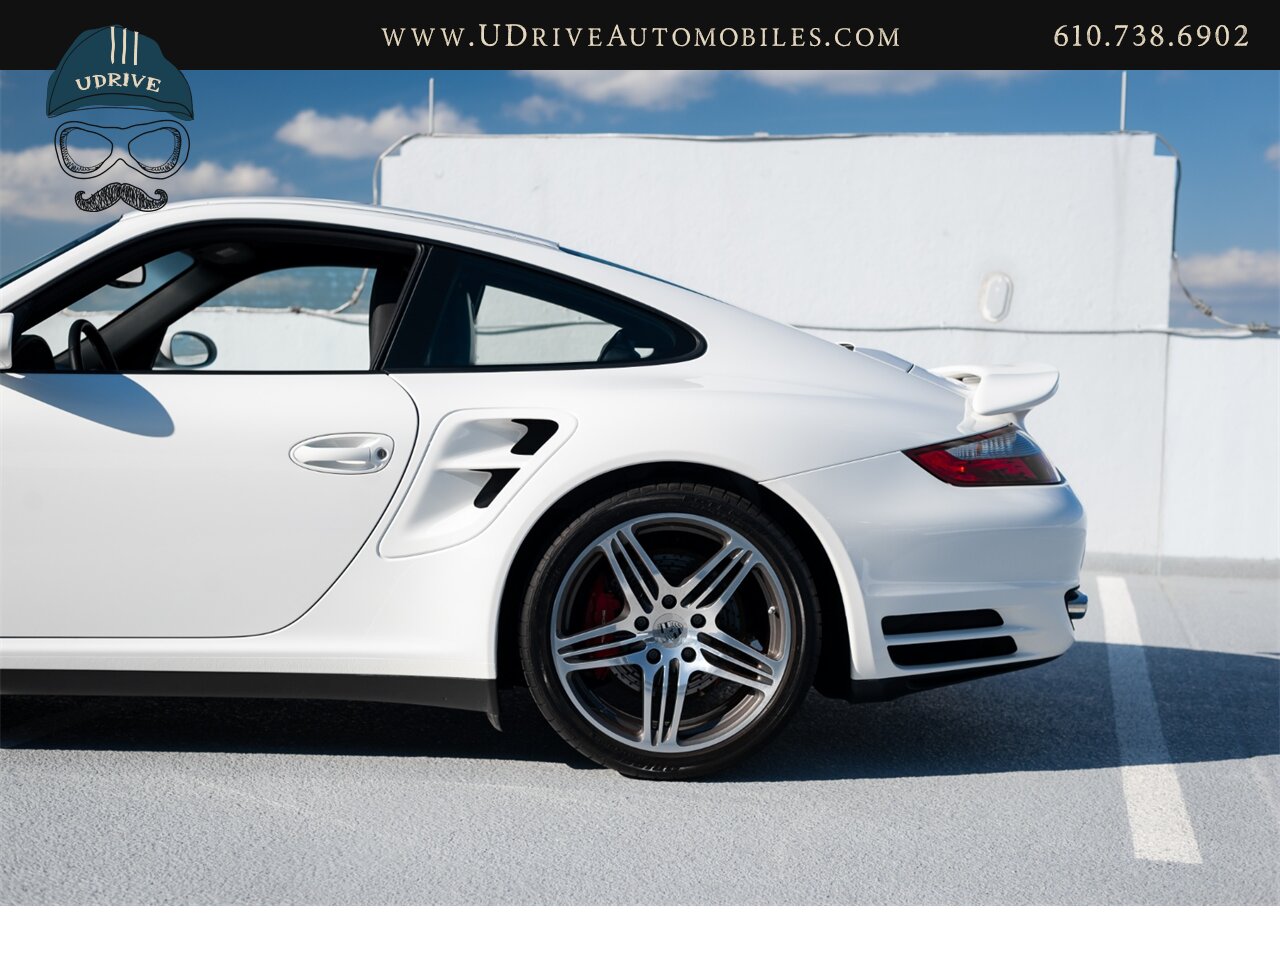 2007 Porsche 911 Turbo 642 Miles 1 Owner Carrara White 997  Sport Chrono Adaptive Sport Seats All Documentation from New - Photo 20 - West Chester, PA 19382